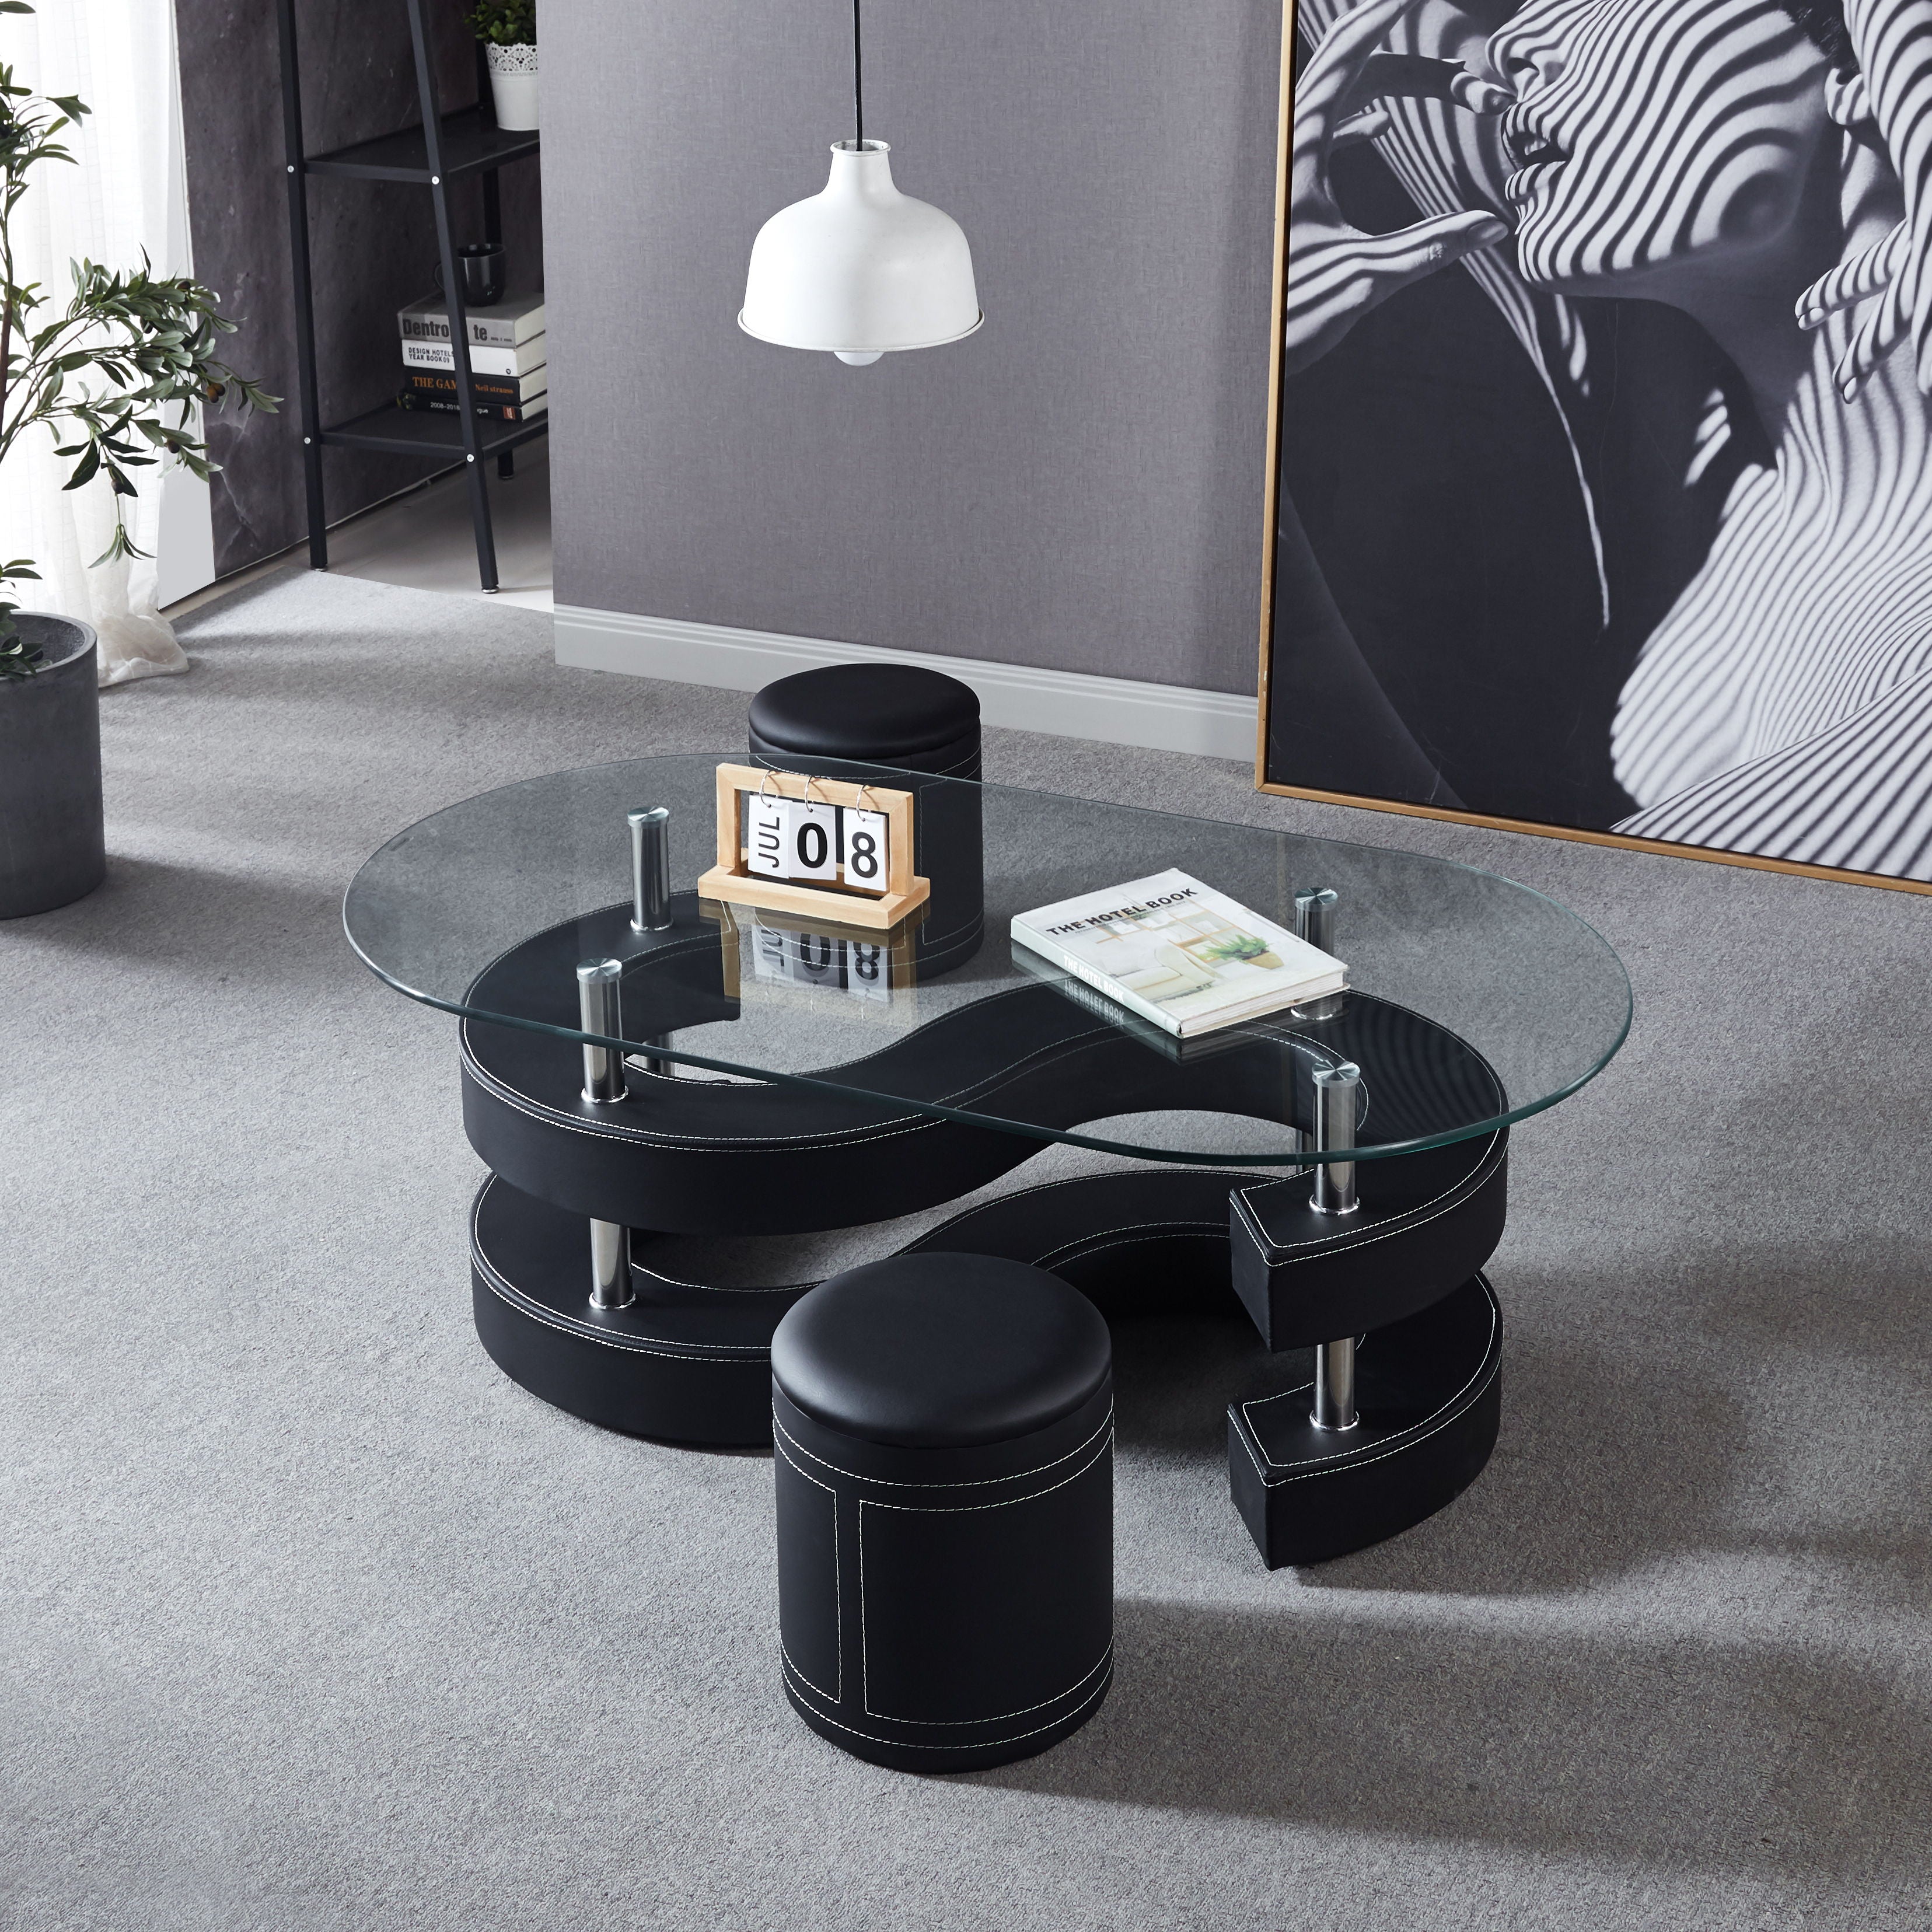 3 Pieces Coffee Table Set, Oval 10Mm / 0.39" Thick Tempered Glass Table And 2 Leather Stools - Black